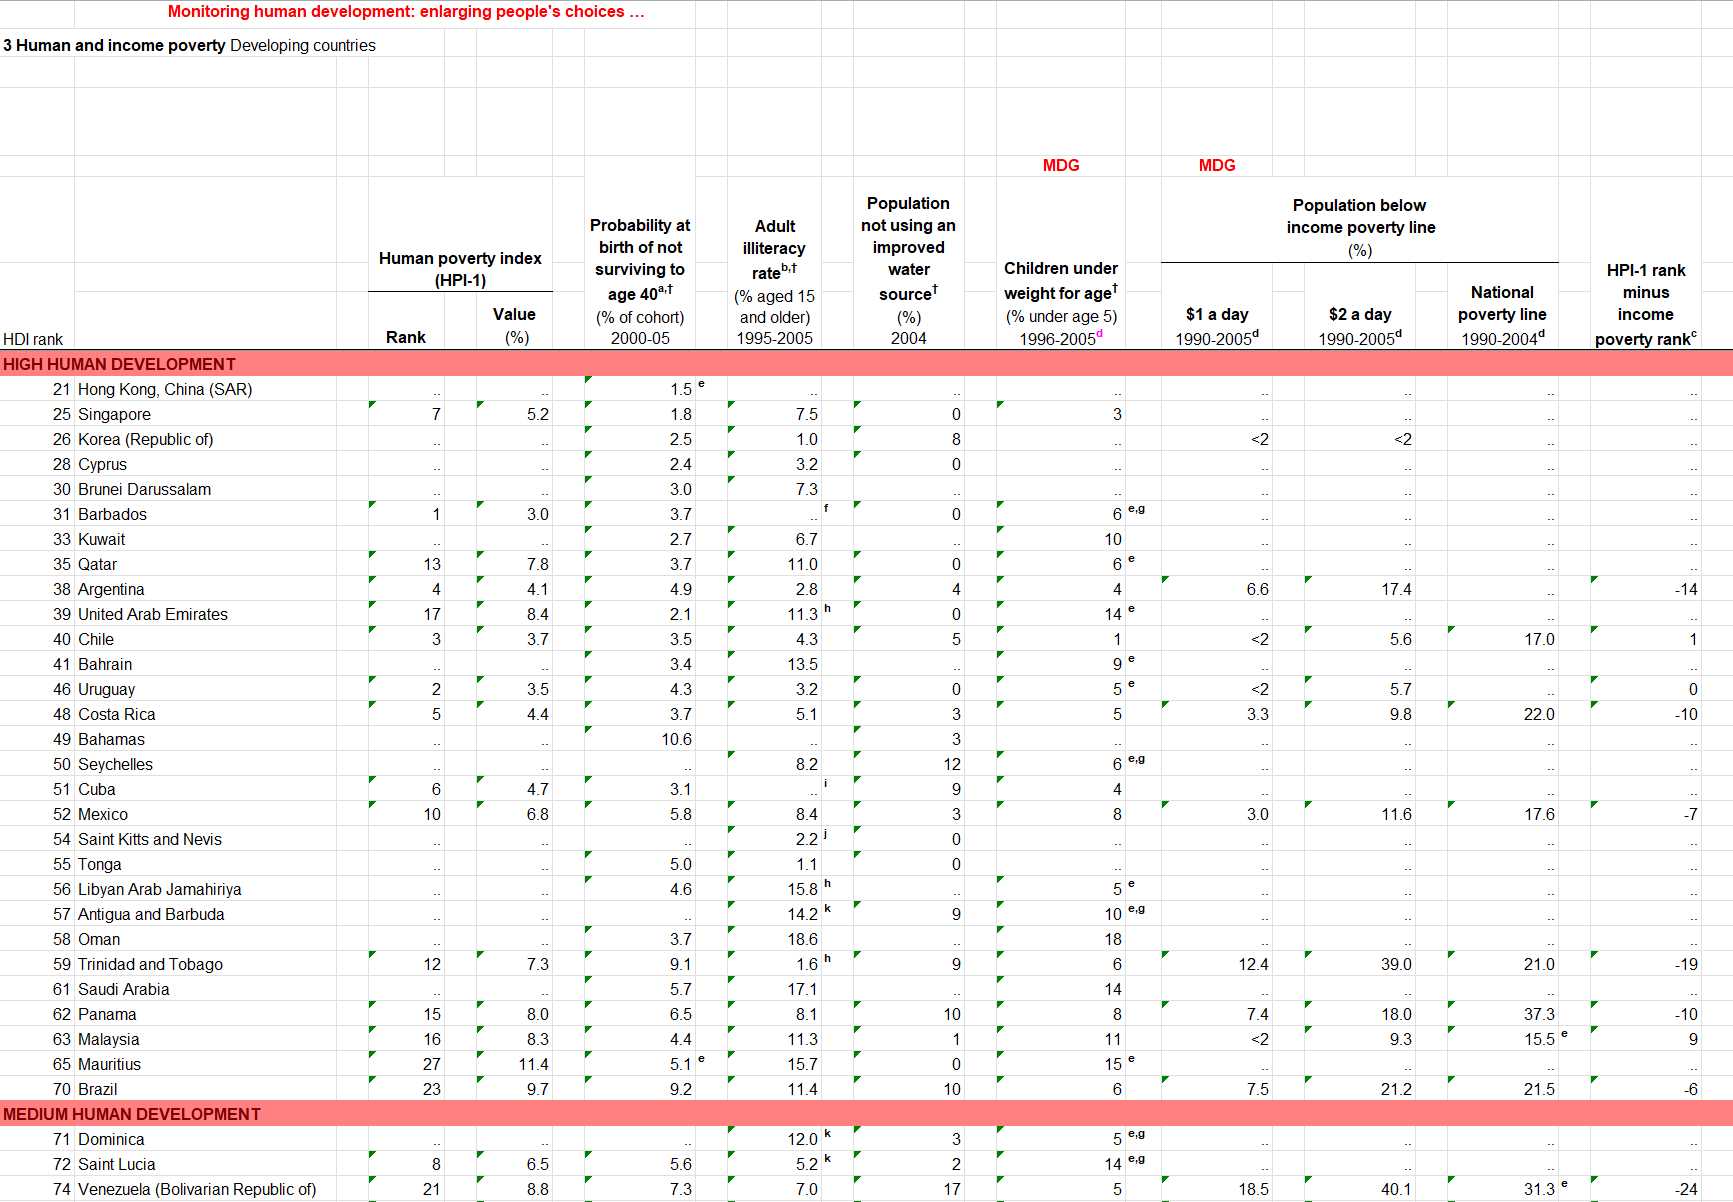 UNDP Human Development Index 2007-2008: a beautiful example of messy data.